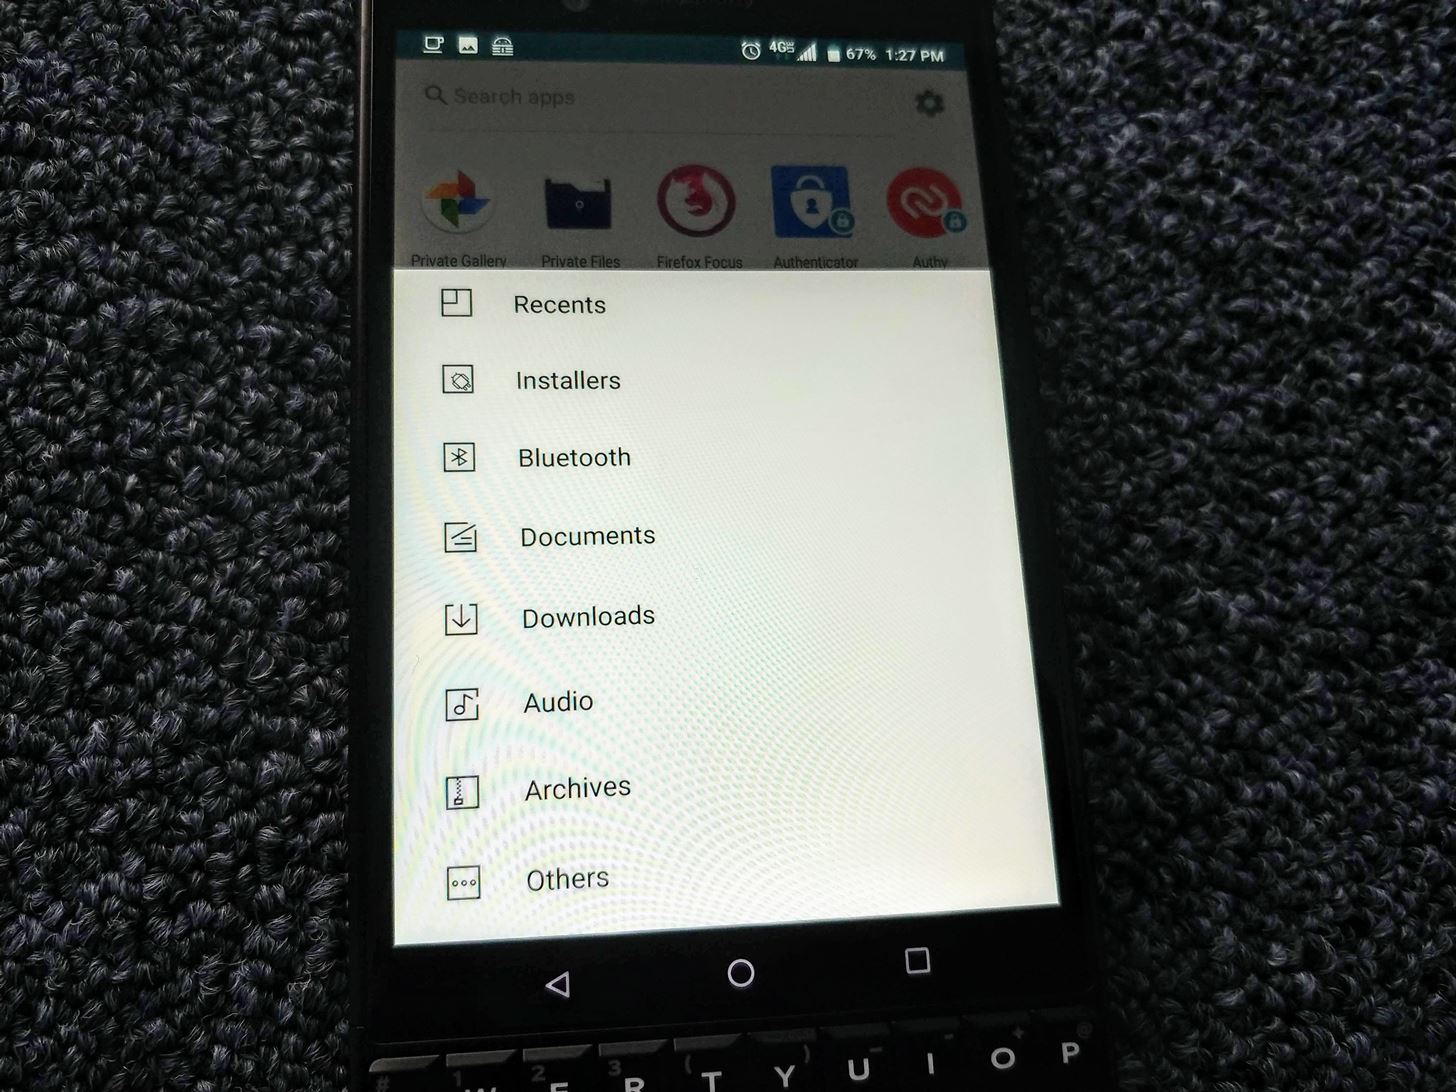 How to Use BlackBerry Locker to Keep Your Files & Apps Private